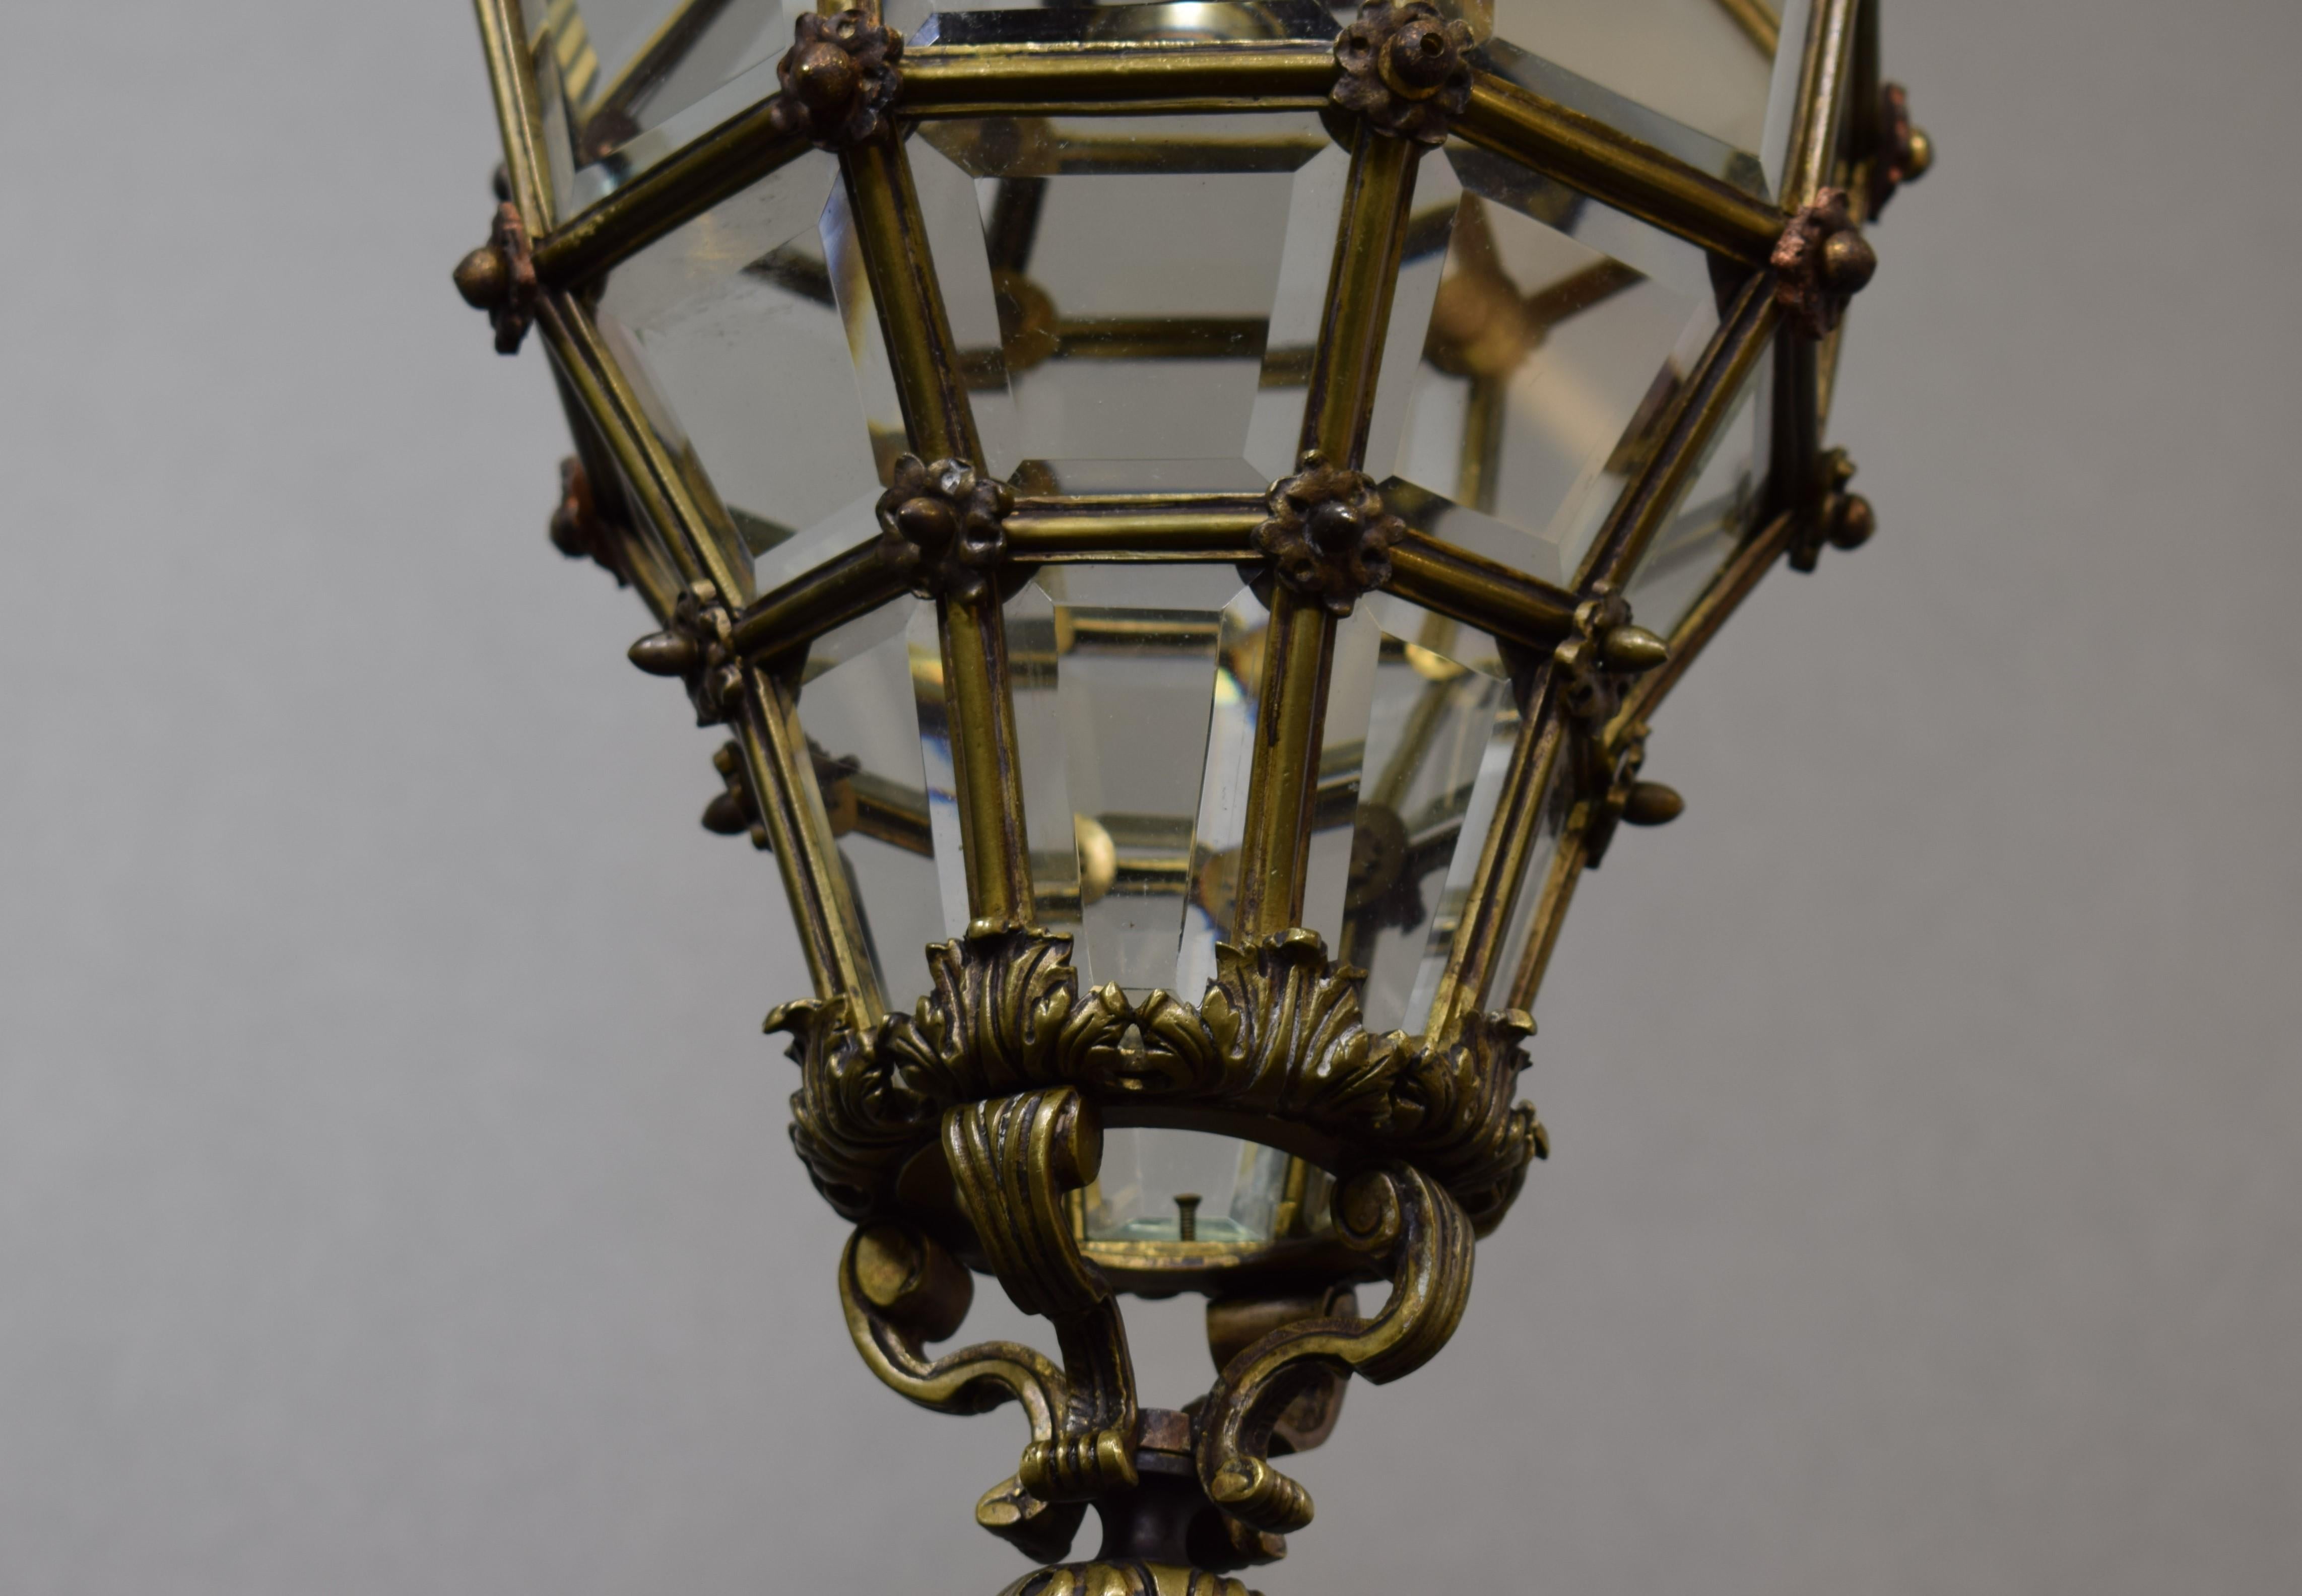 A very fine bronze Versailles style lantern. Beveled glass panels. 
France, circa 1910. 1 light
Dimensions: Height 23